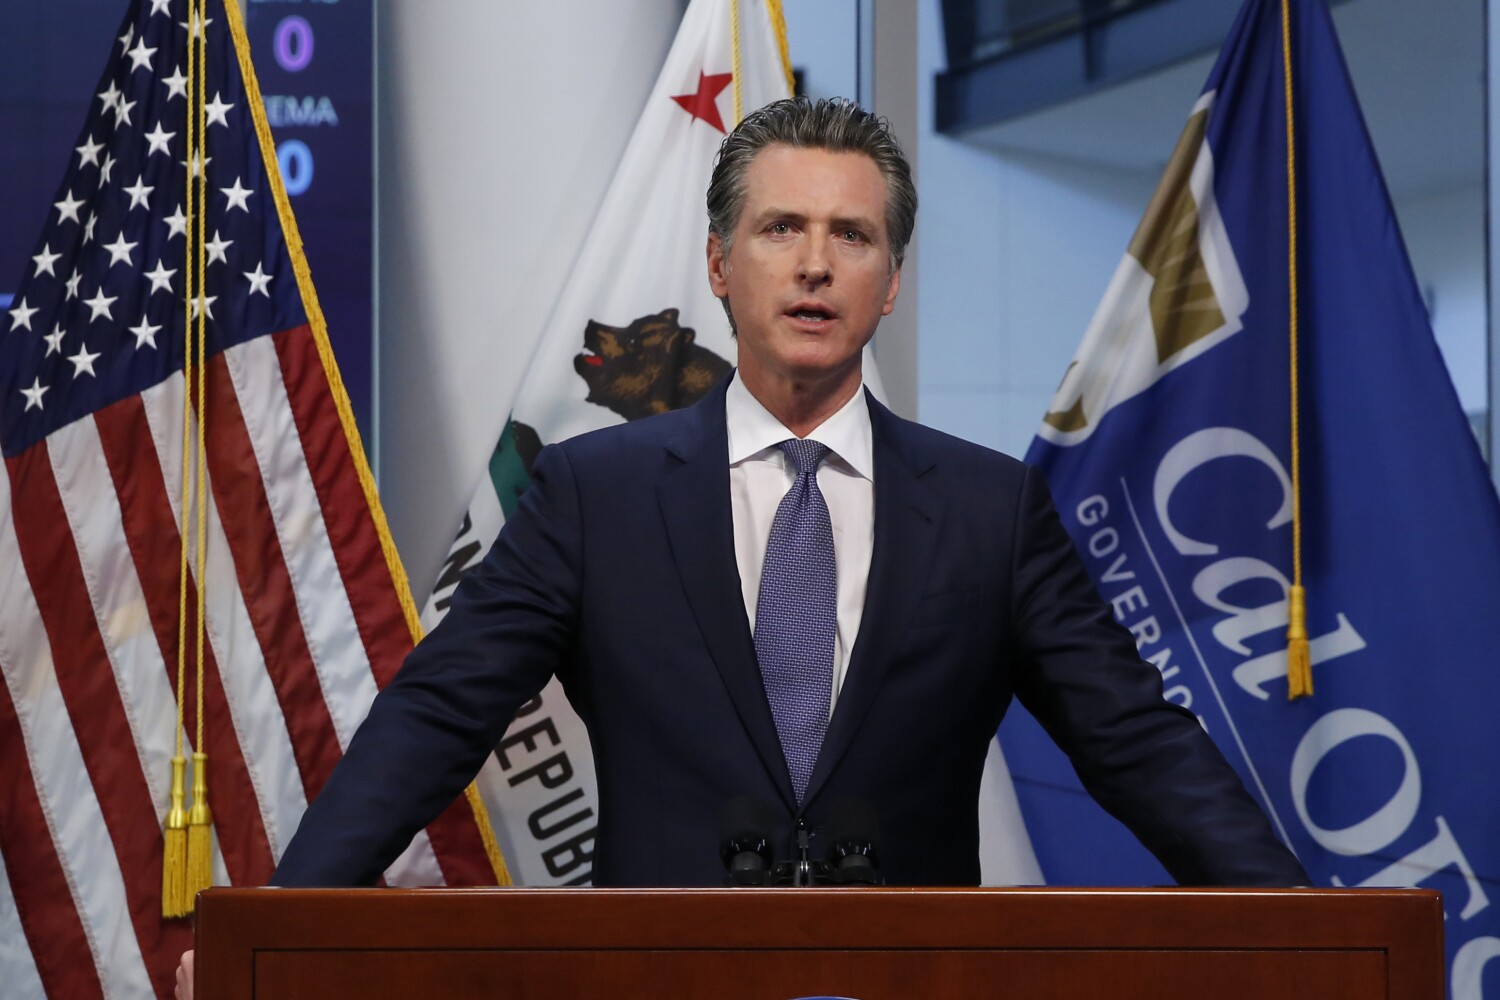 Gov. Newsom orders statewide ban on evictions for renters affected by coronavirus